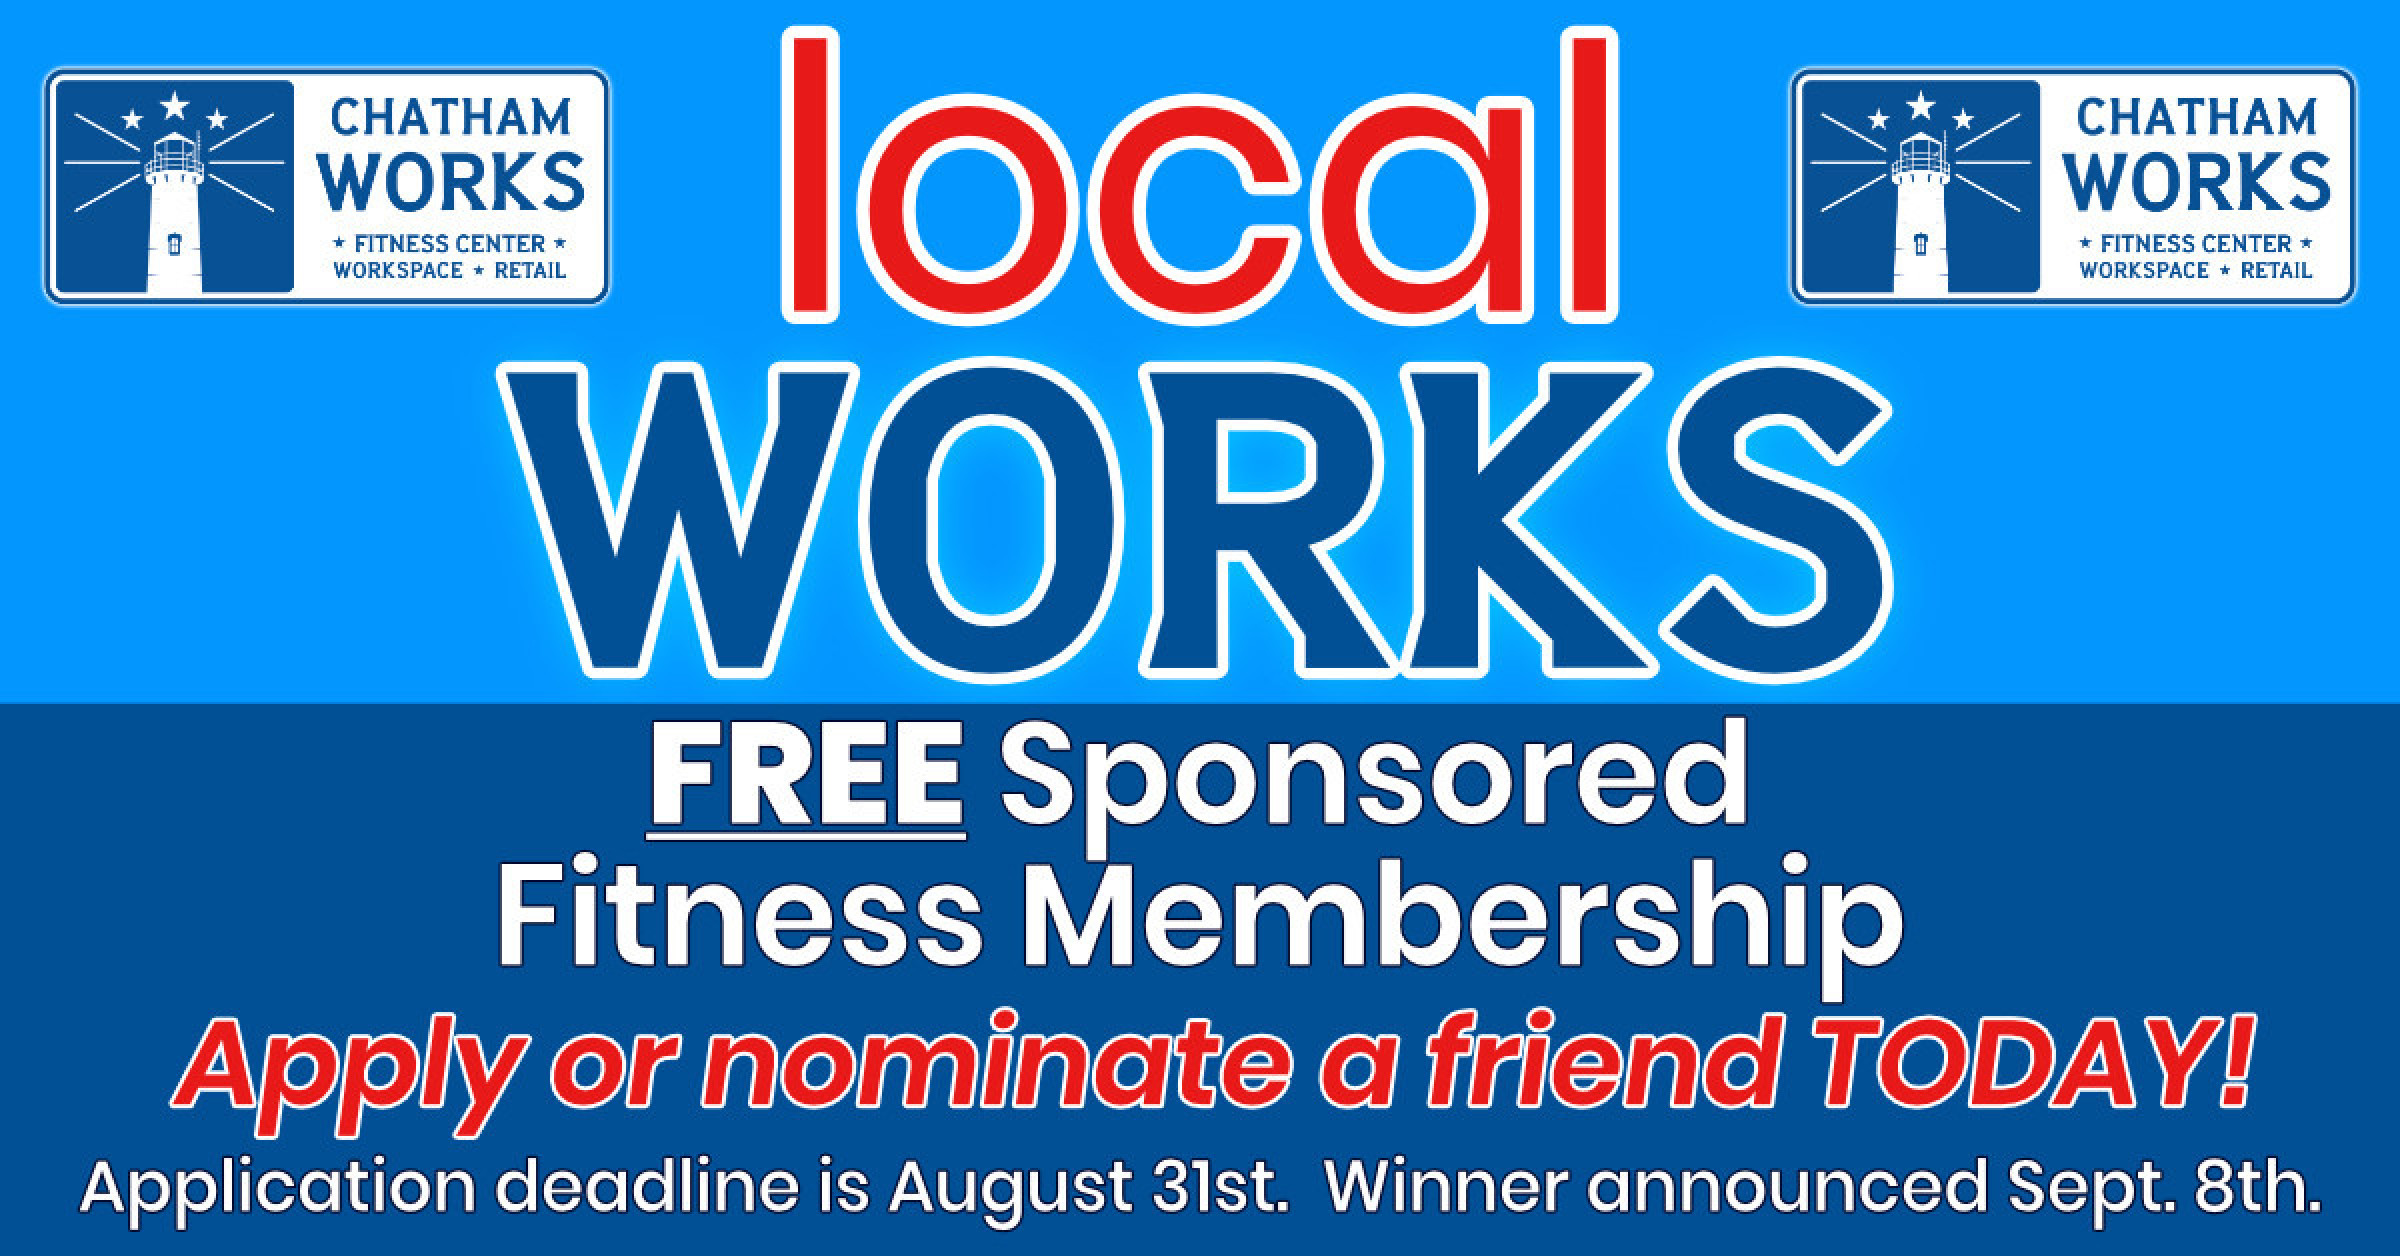 Local Works news